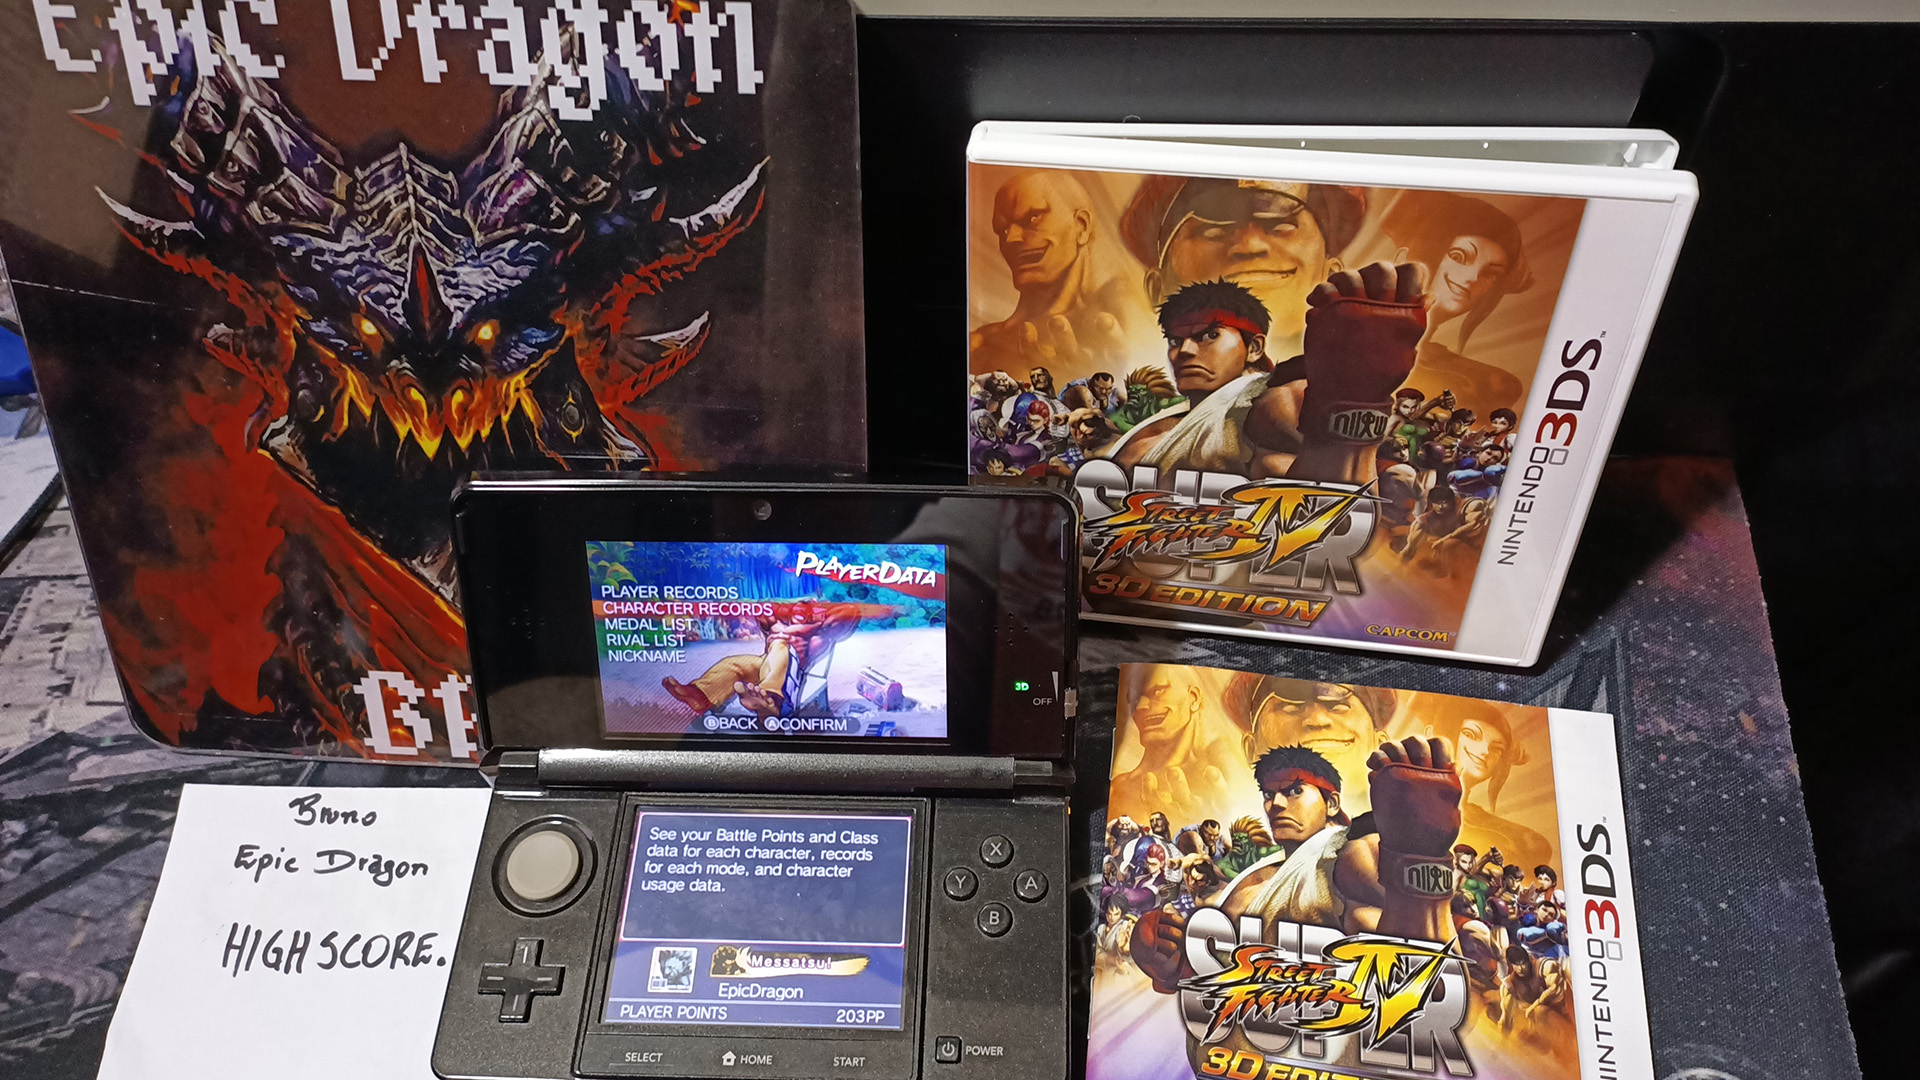 EpicDragon: Super Street Fighter IV 3D Edition: Arcade: Fei-Long (Nintendo 3DS) 642,400 points on 2022-08-01 21:00:38